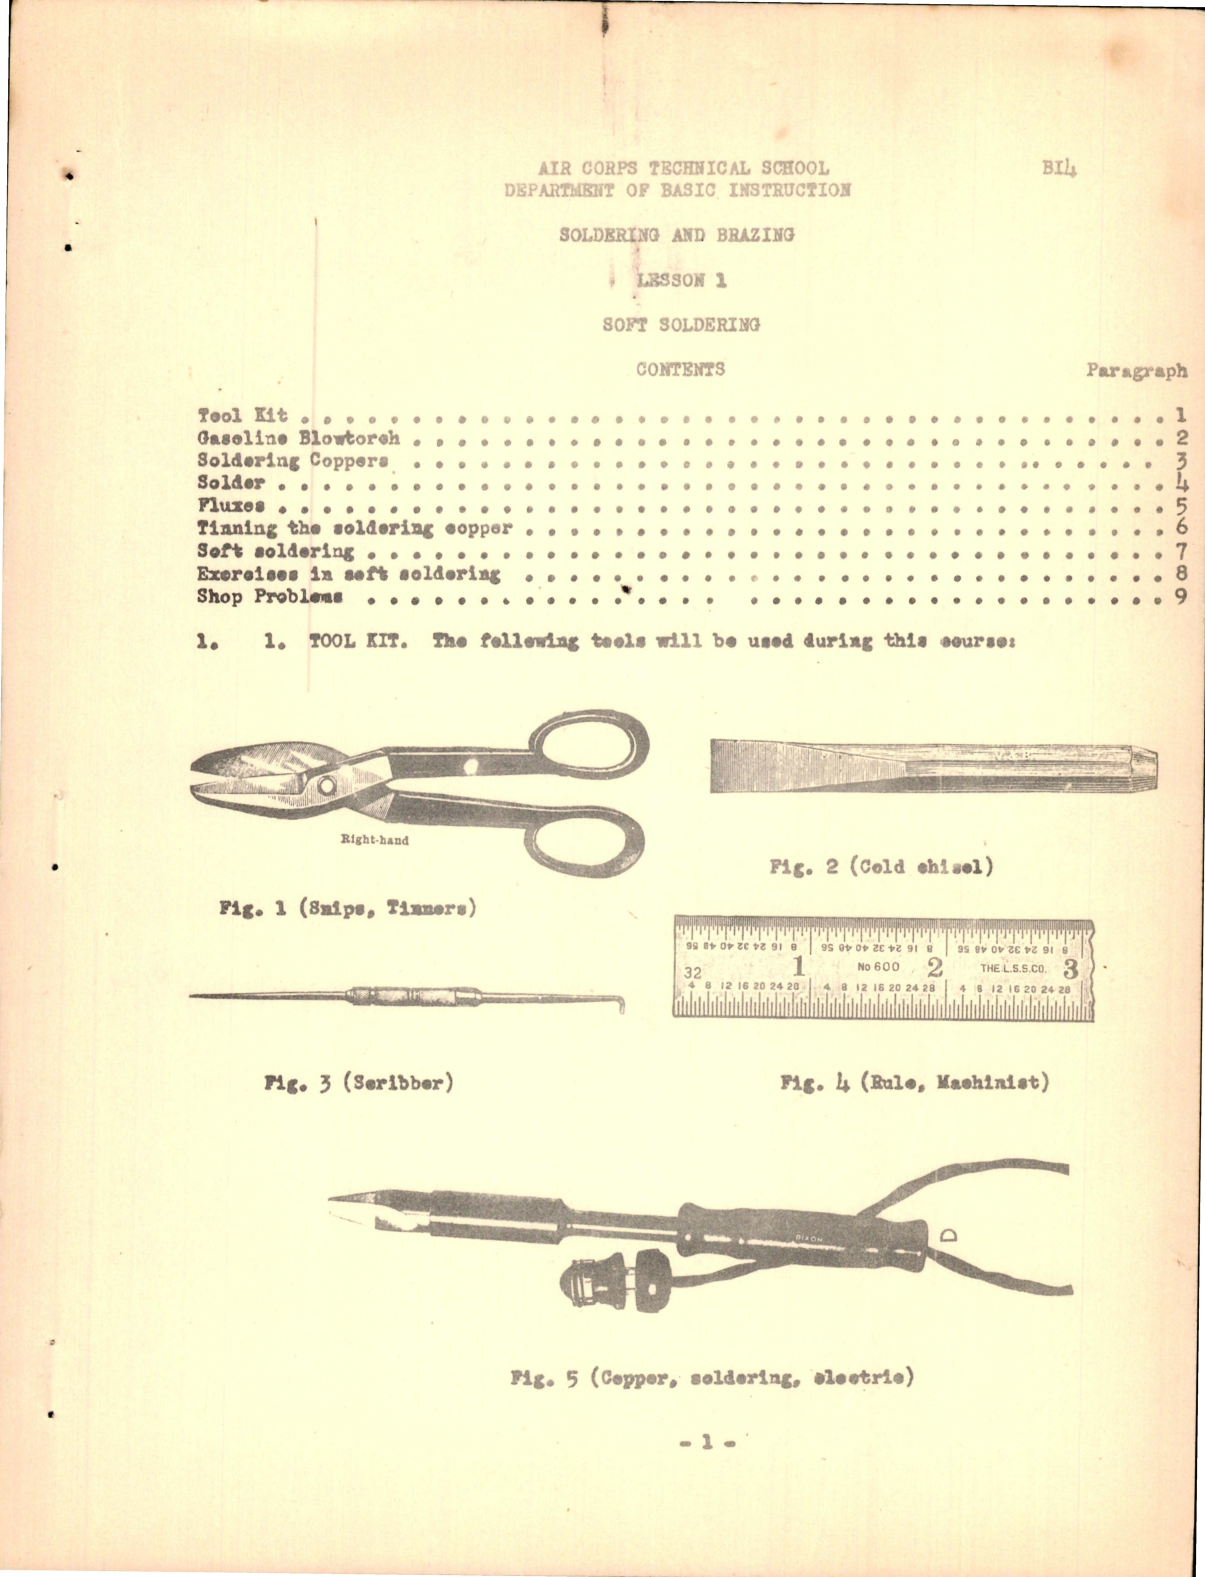 Sample page 5 from AirCorps Library document: Elements of Metalwork II for Soldering and Brazing 